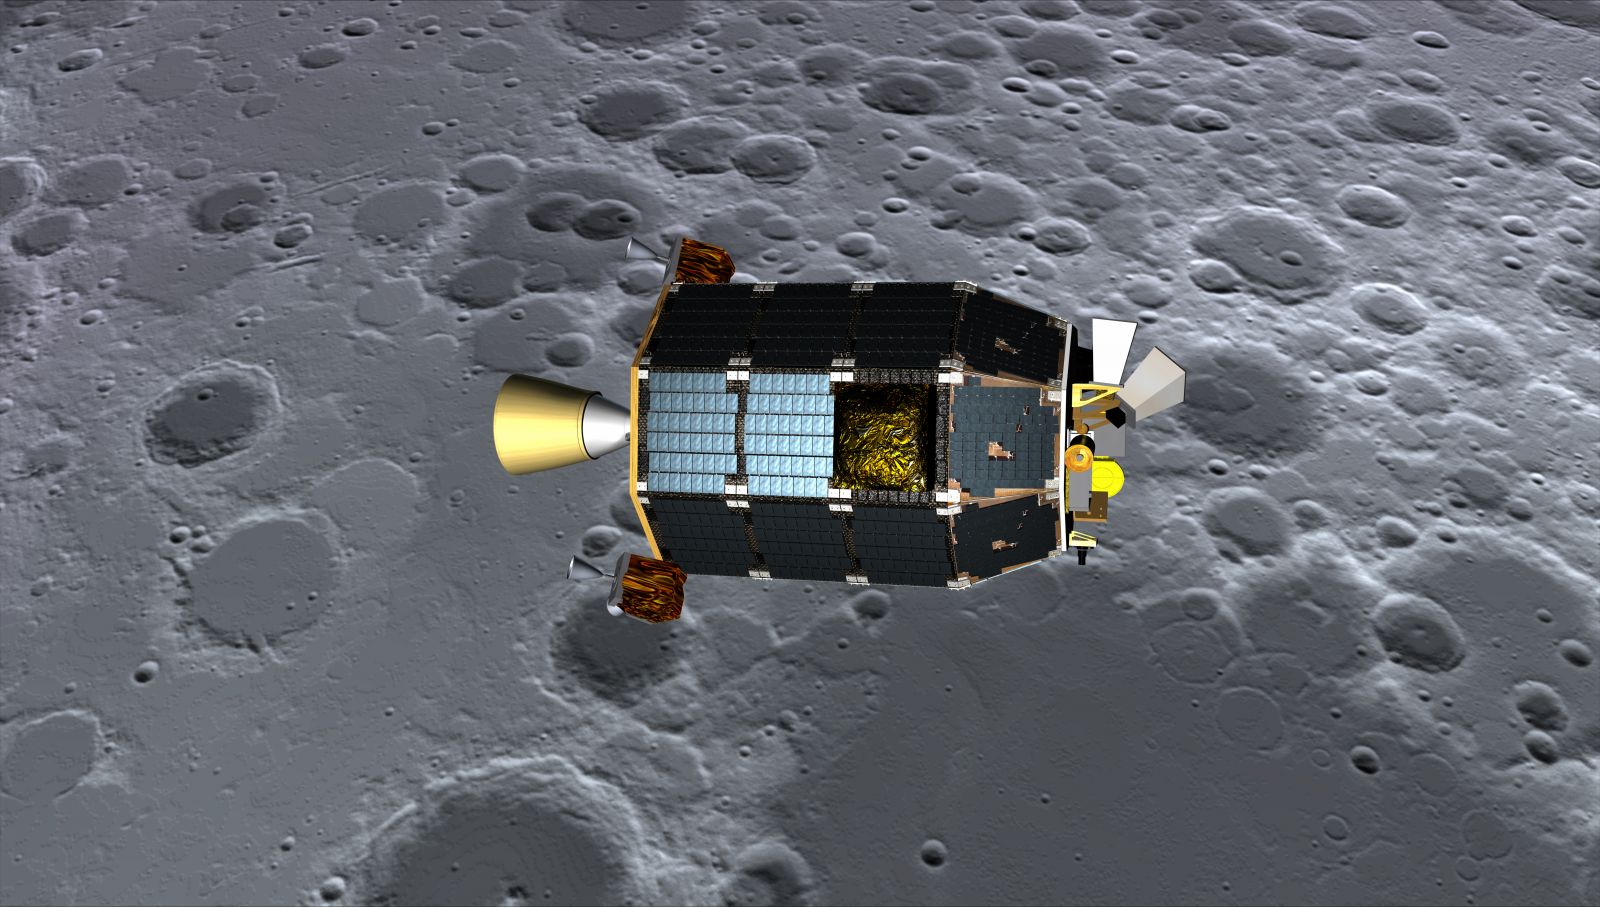 Illustration of NASA's LADEE (Lunar Atmosphere and Dust Environment Explorer) in orbit above the Moon.